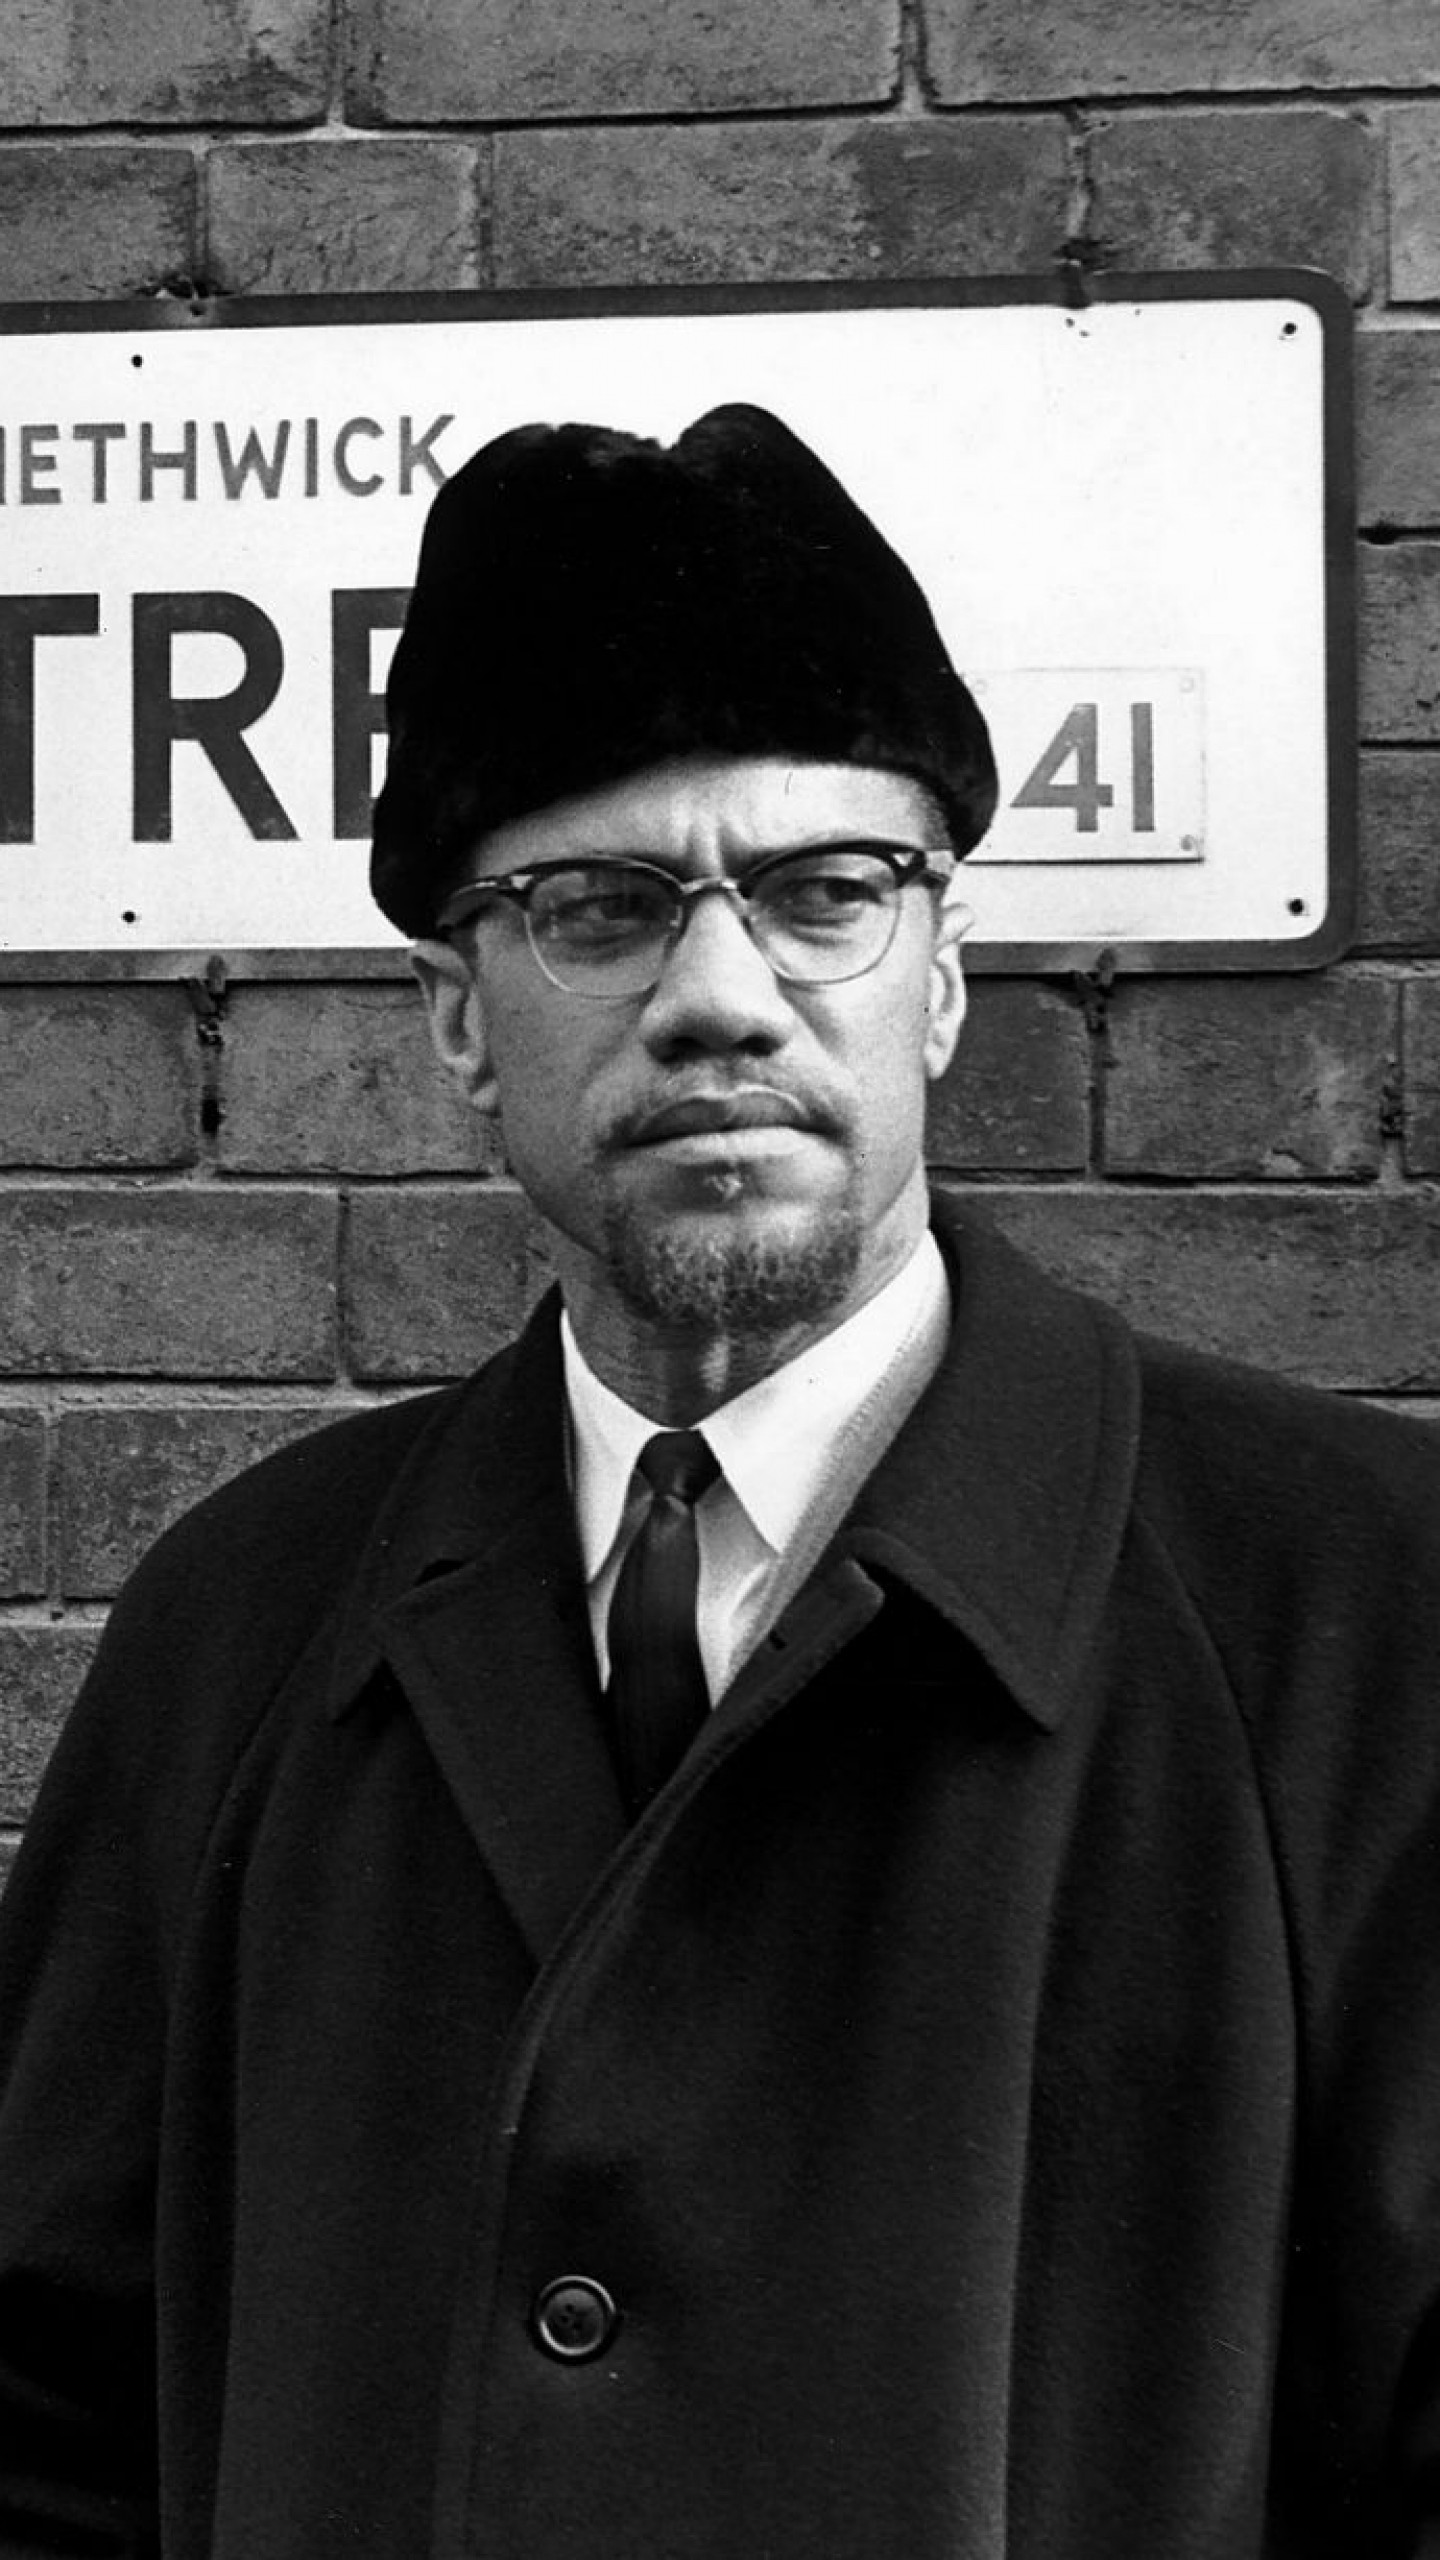 Malcolm X Wallpapers 57 images